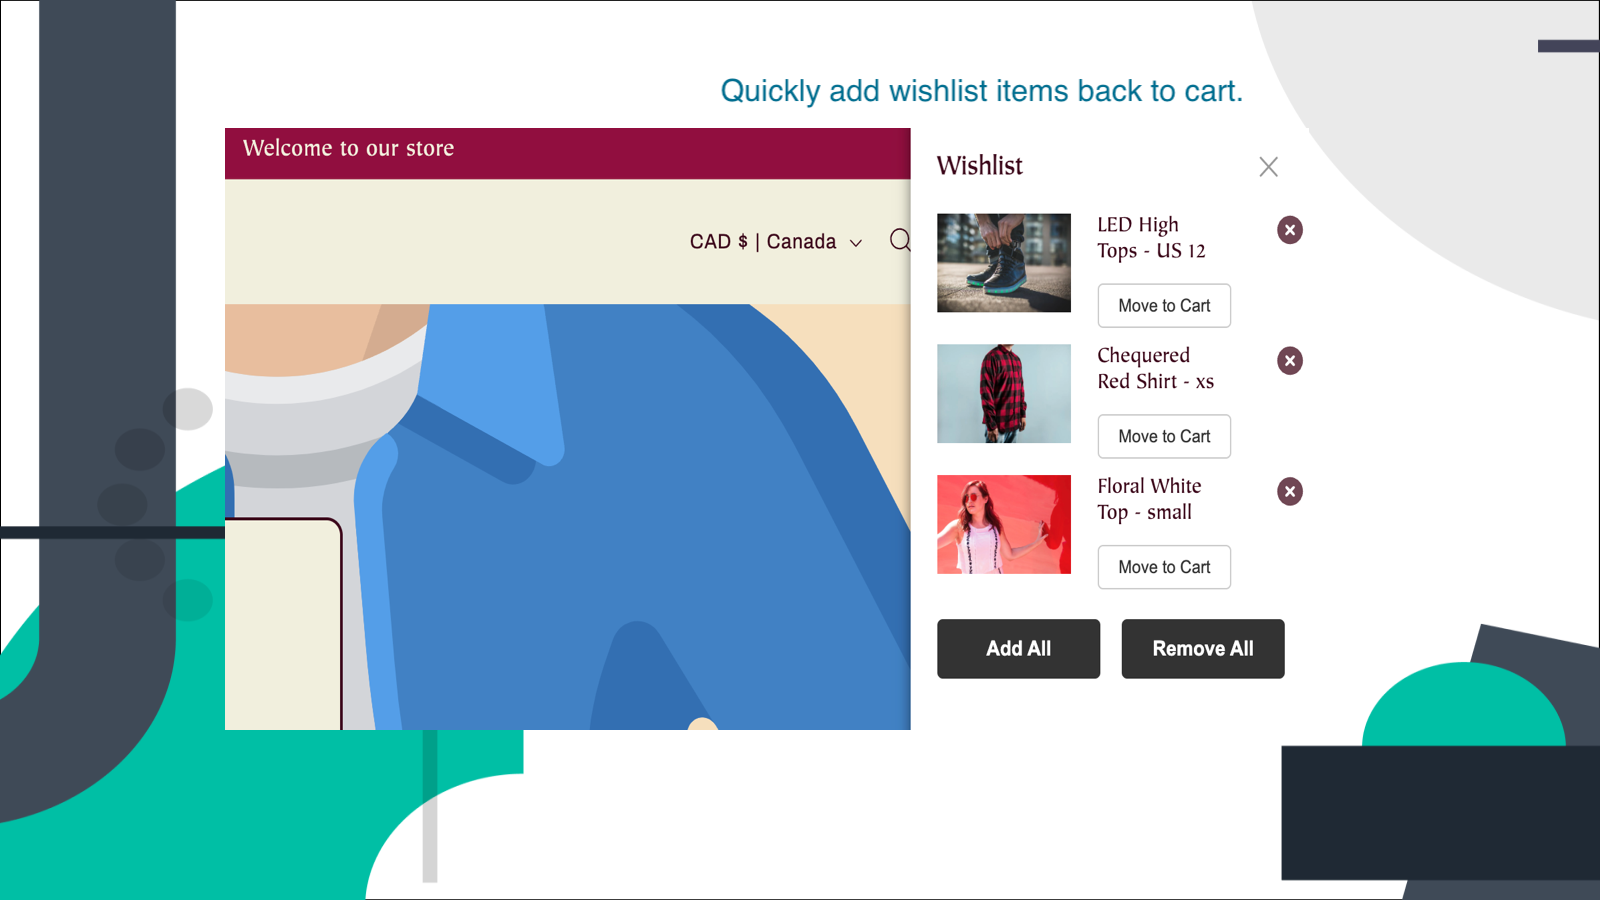 Quickly add wishlist items back to cart.